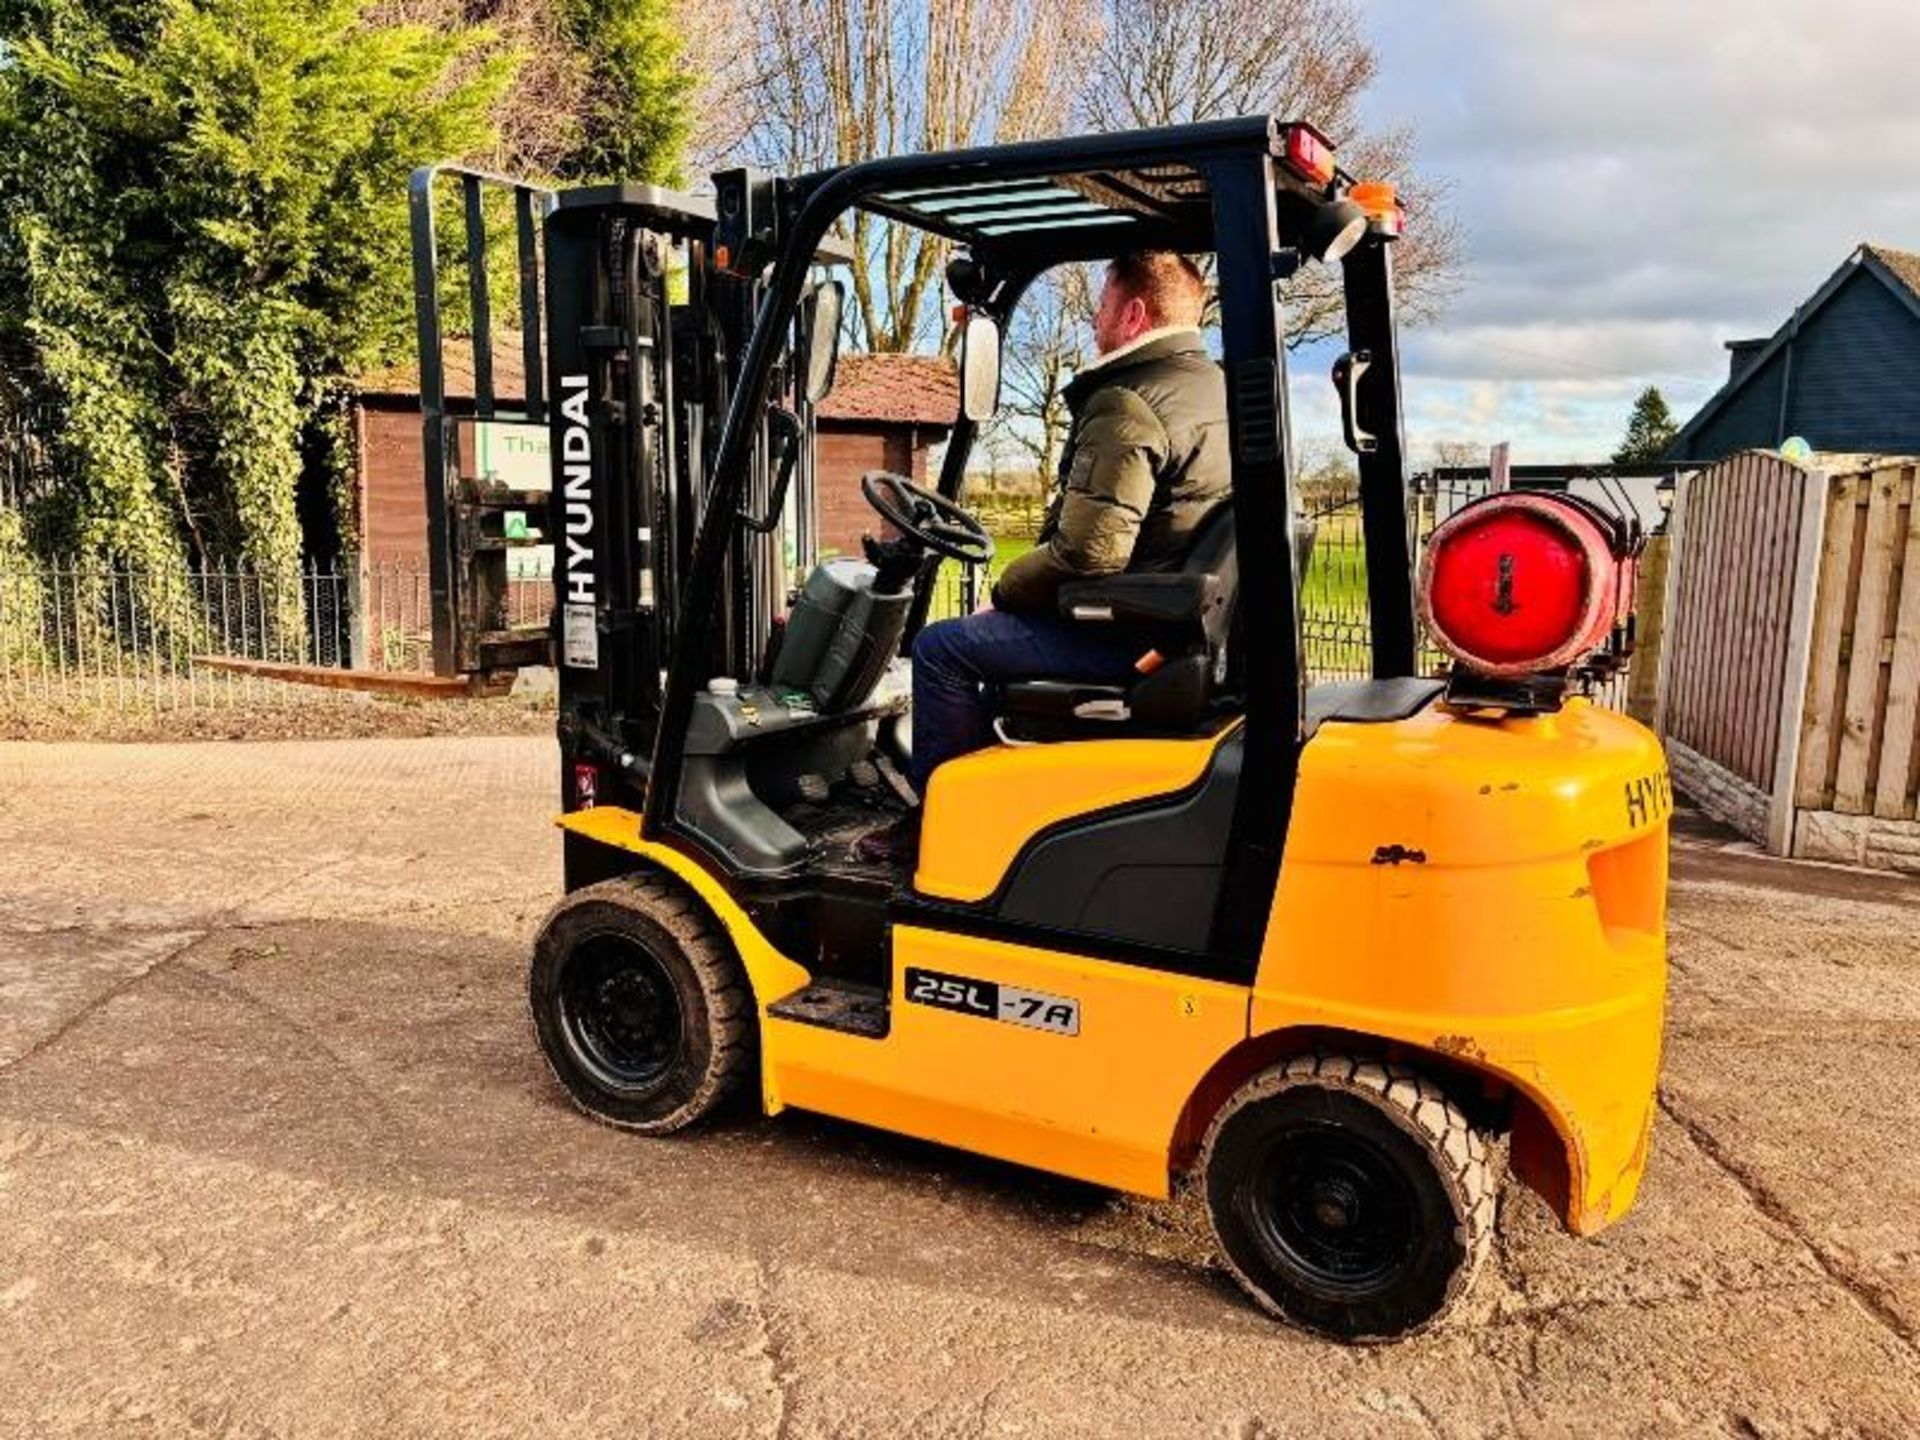 HYUNDAI 25L-7A CONTAINER SPEC FORKLIFT *YEAR 2018, 2172 HOURS* C/W SIDE SHIFT - Image 12 of 17